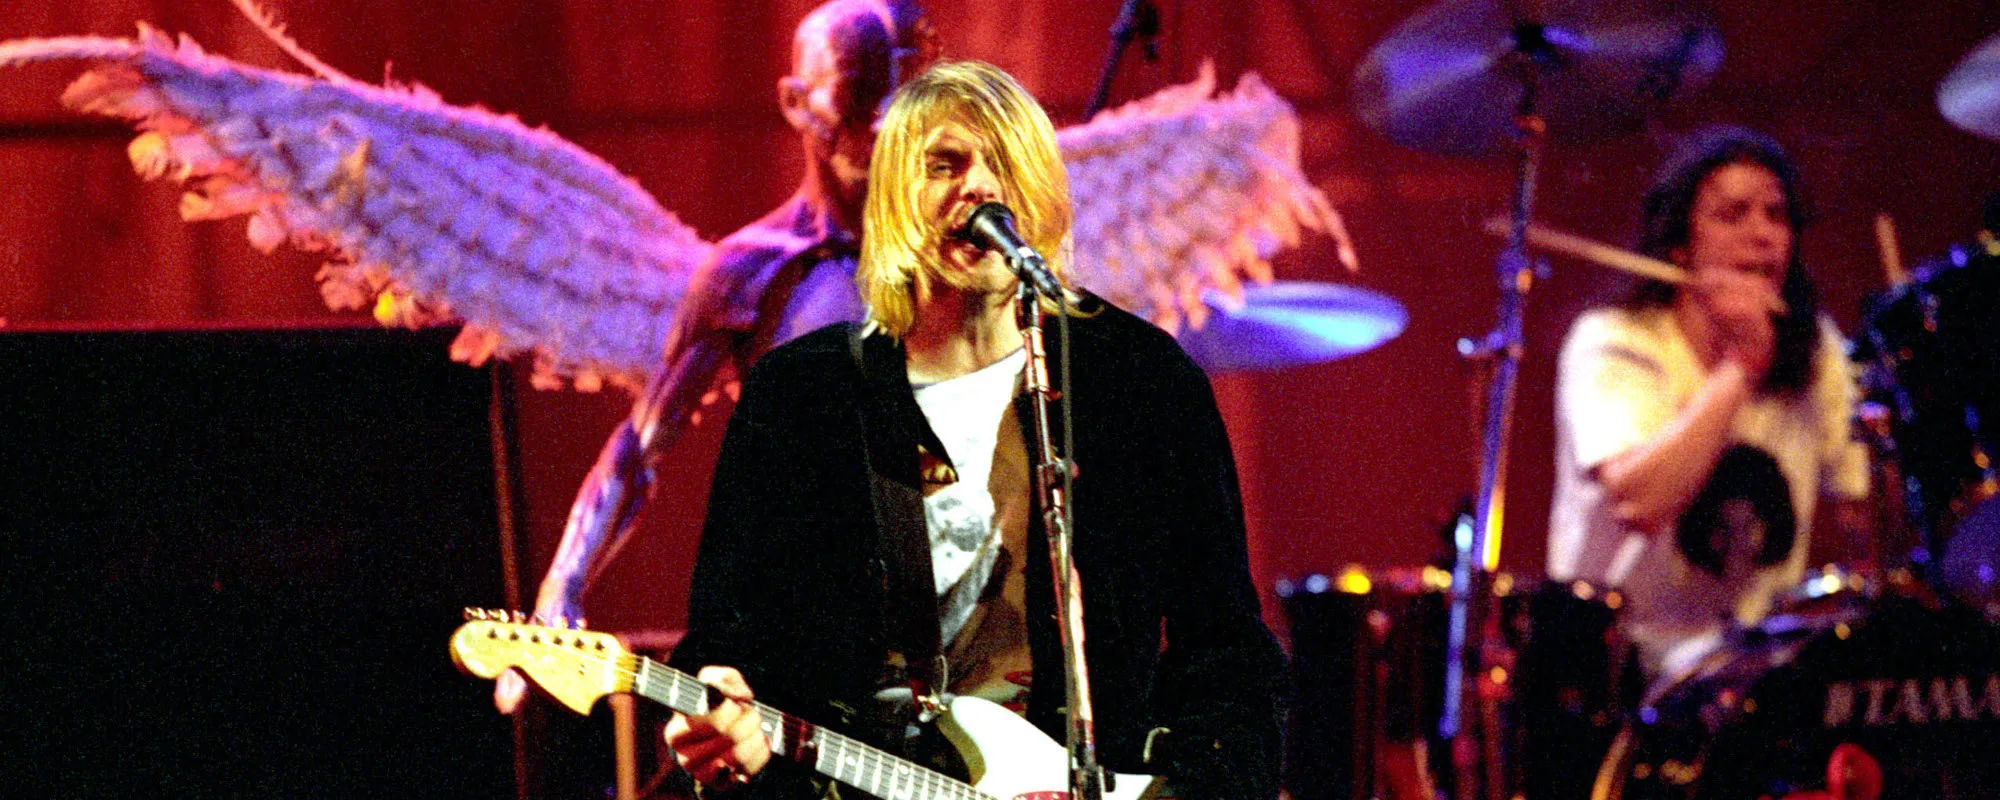 We Asked A.I. to Write a Duet in the Styles of Kurt Cobain and Courtney Love – Check the Results